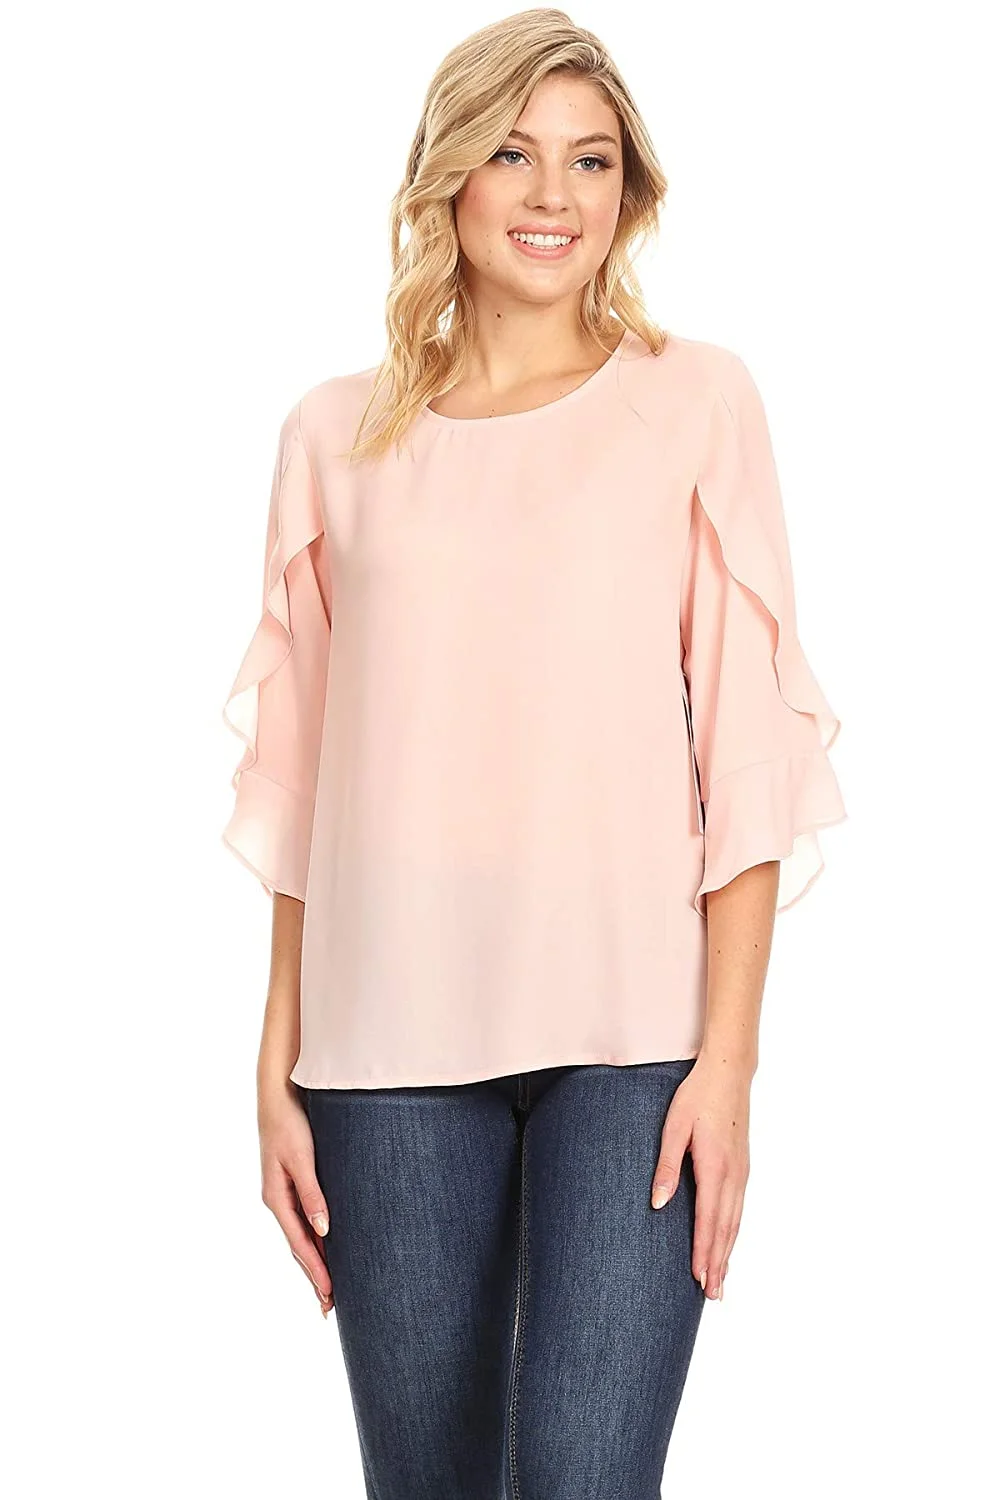 Women's Basic Casual Comfortable Relaxed 3/4 Wrapped Bell Sleeve Blouse Chiffon TOP